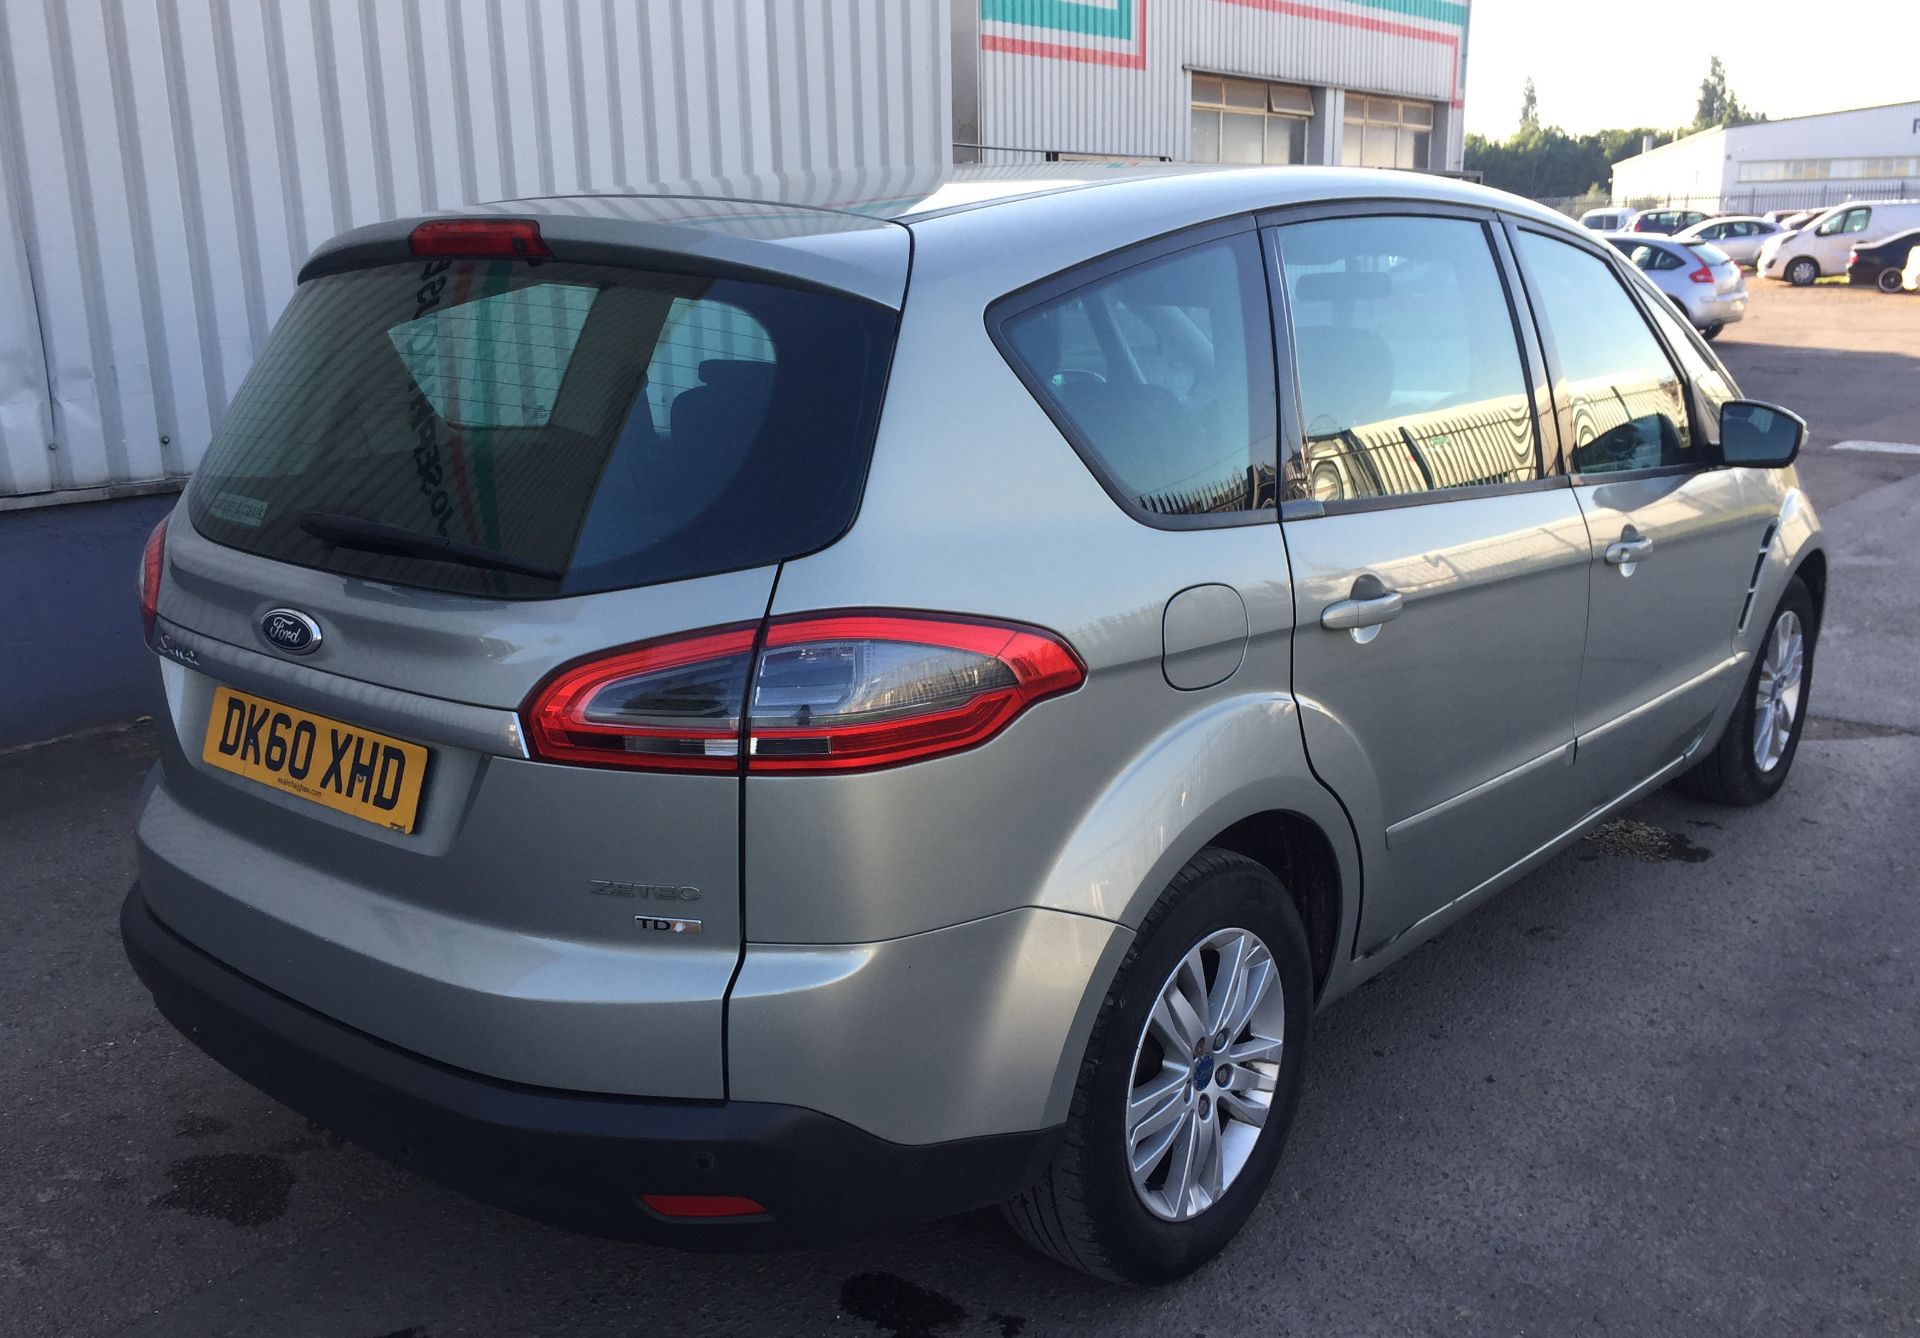 2010 Ford Smax 2.0 TDCI Zetec 5 Door MPV - CL505 - NO VAT ON THE HAMMER - Location: Corby, - Image 11 of 18